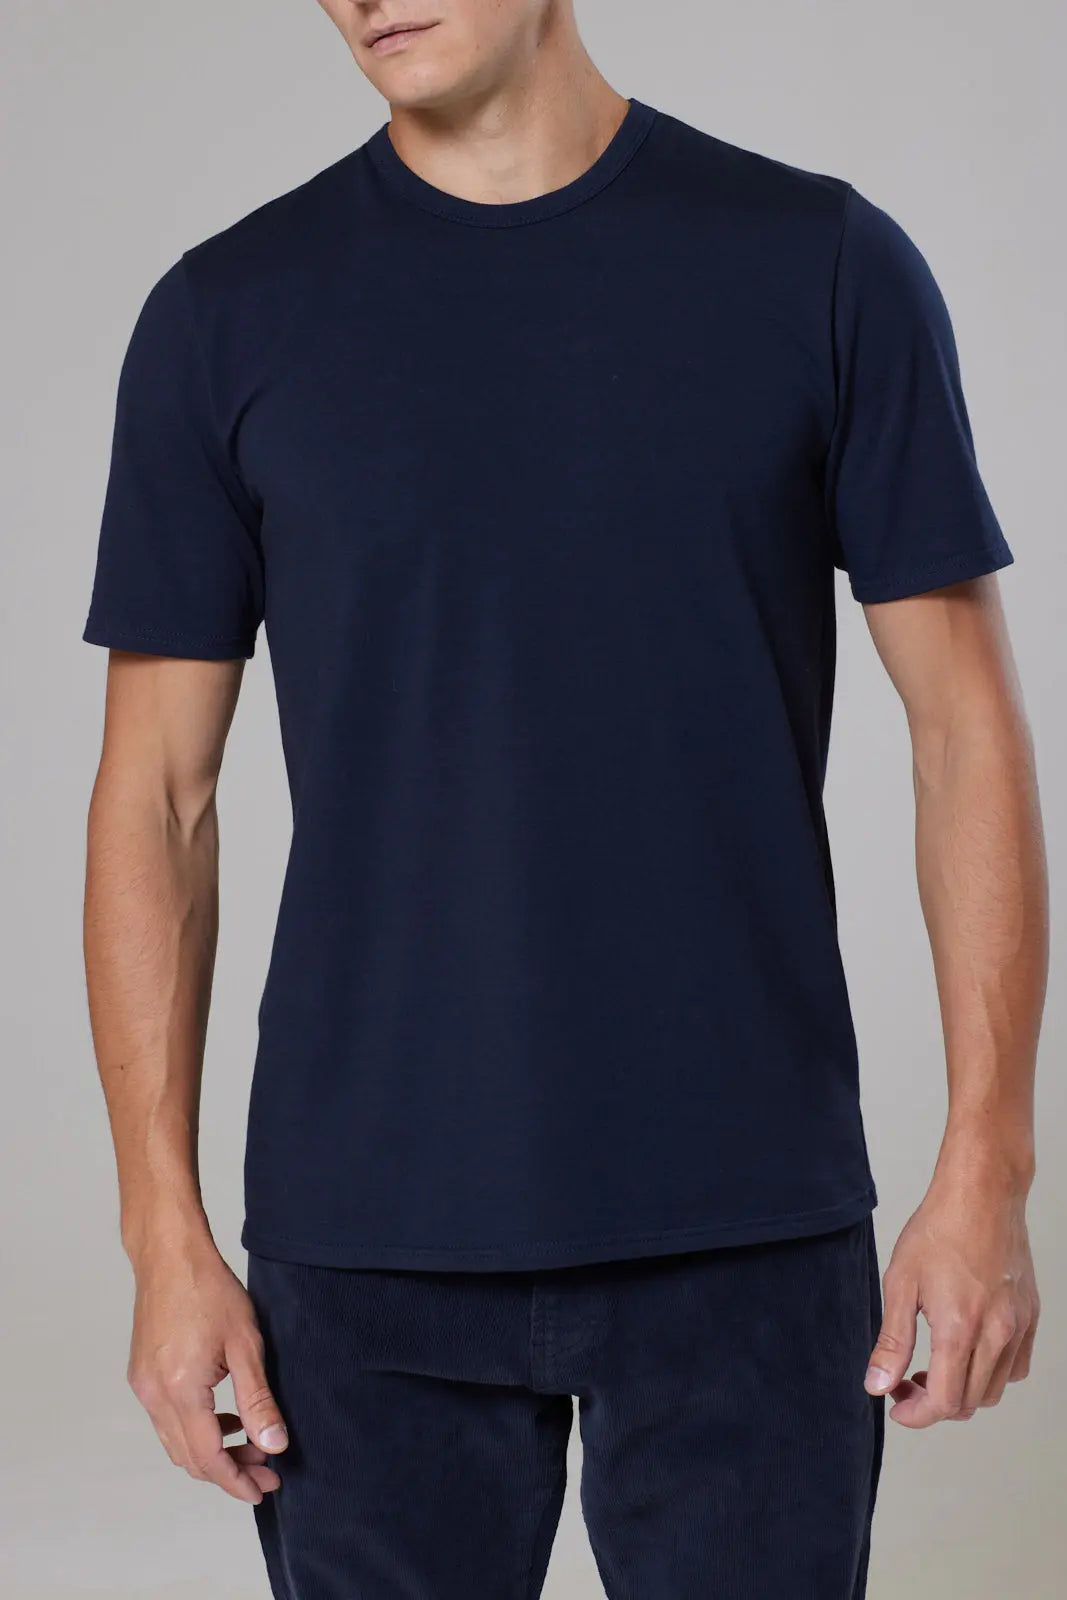 Quality Trueman Cotton Short Sleeve T-Shirts for the Best Comfort